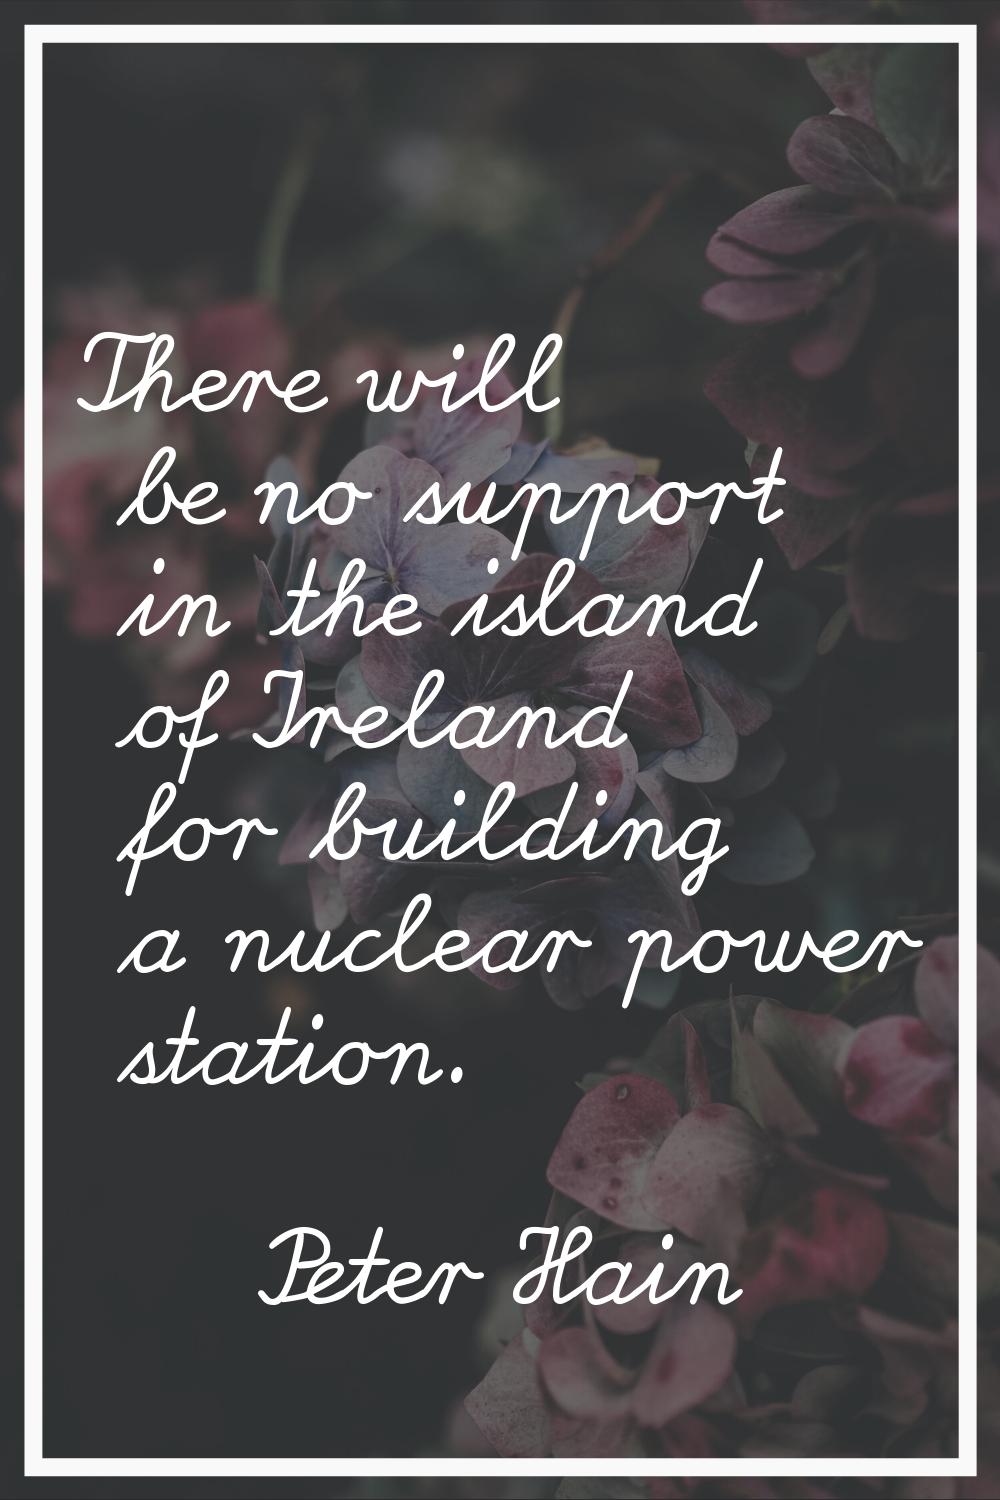 There will be no support in the island of Ireland for building a nuclear power station.